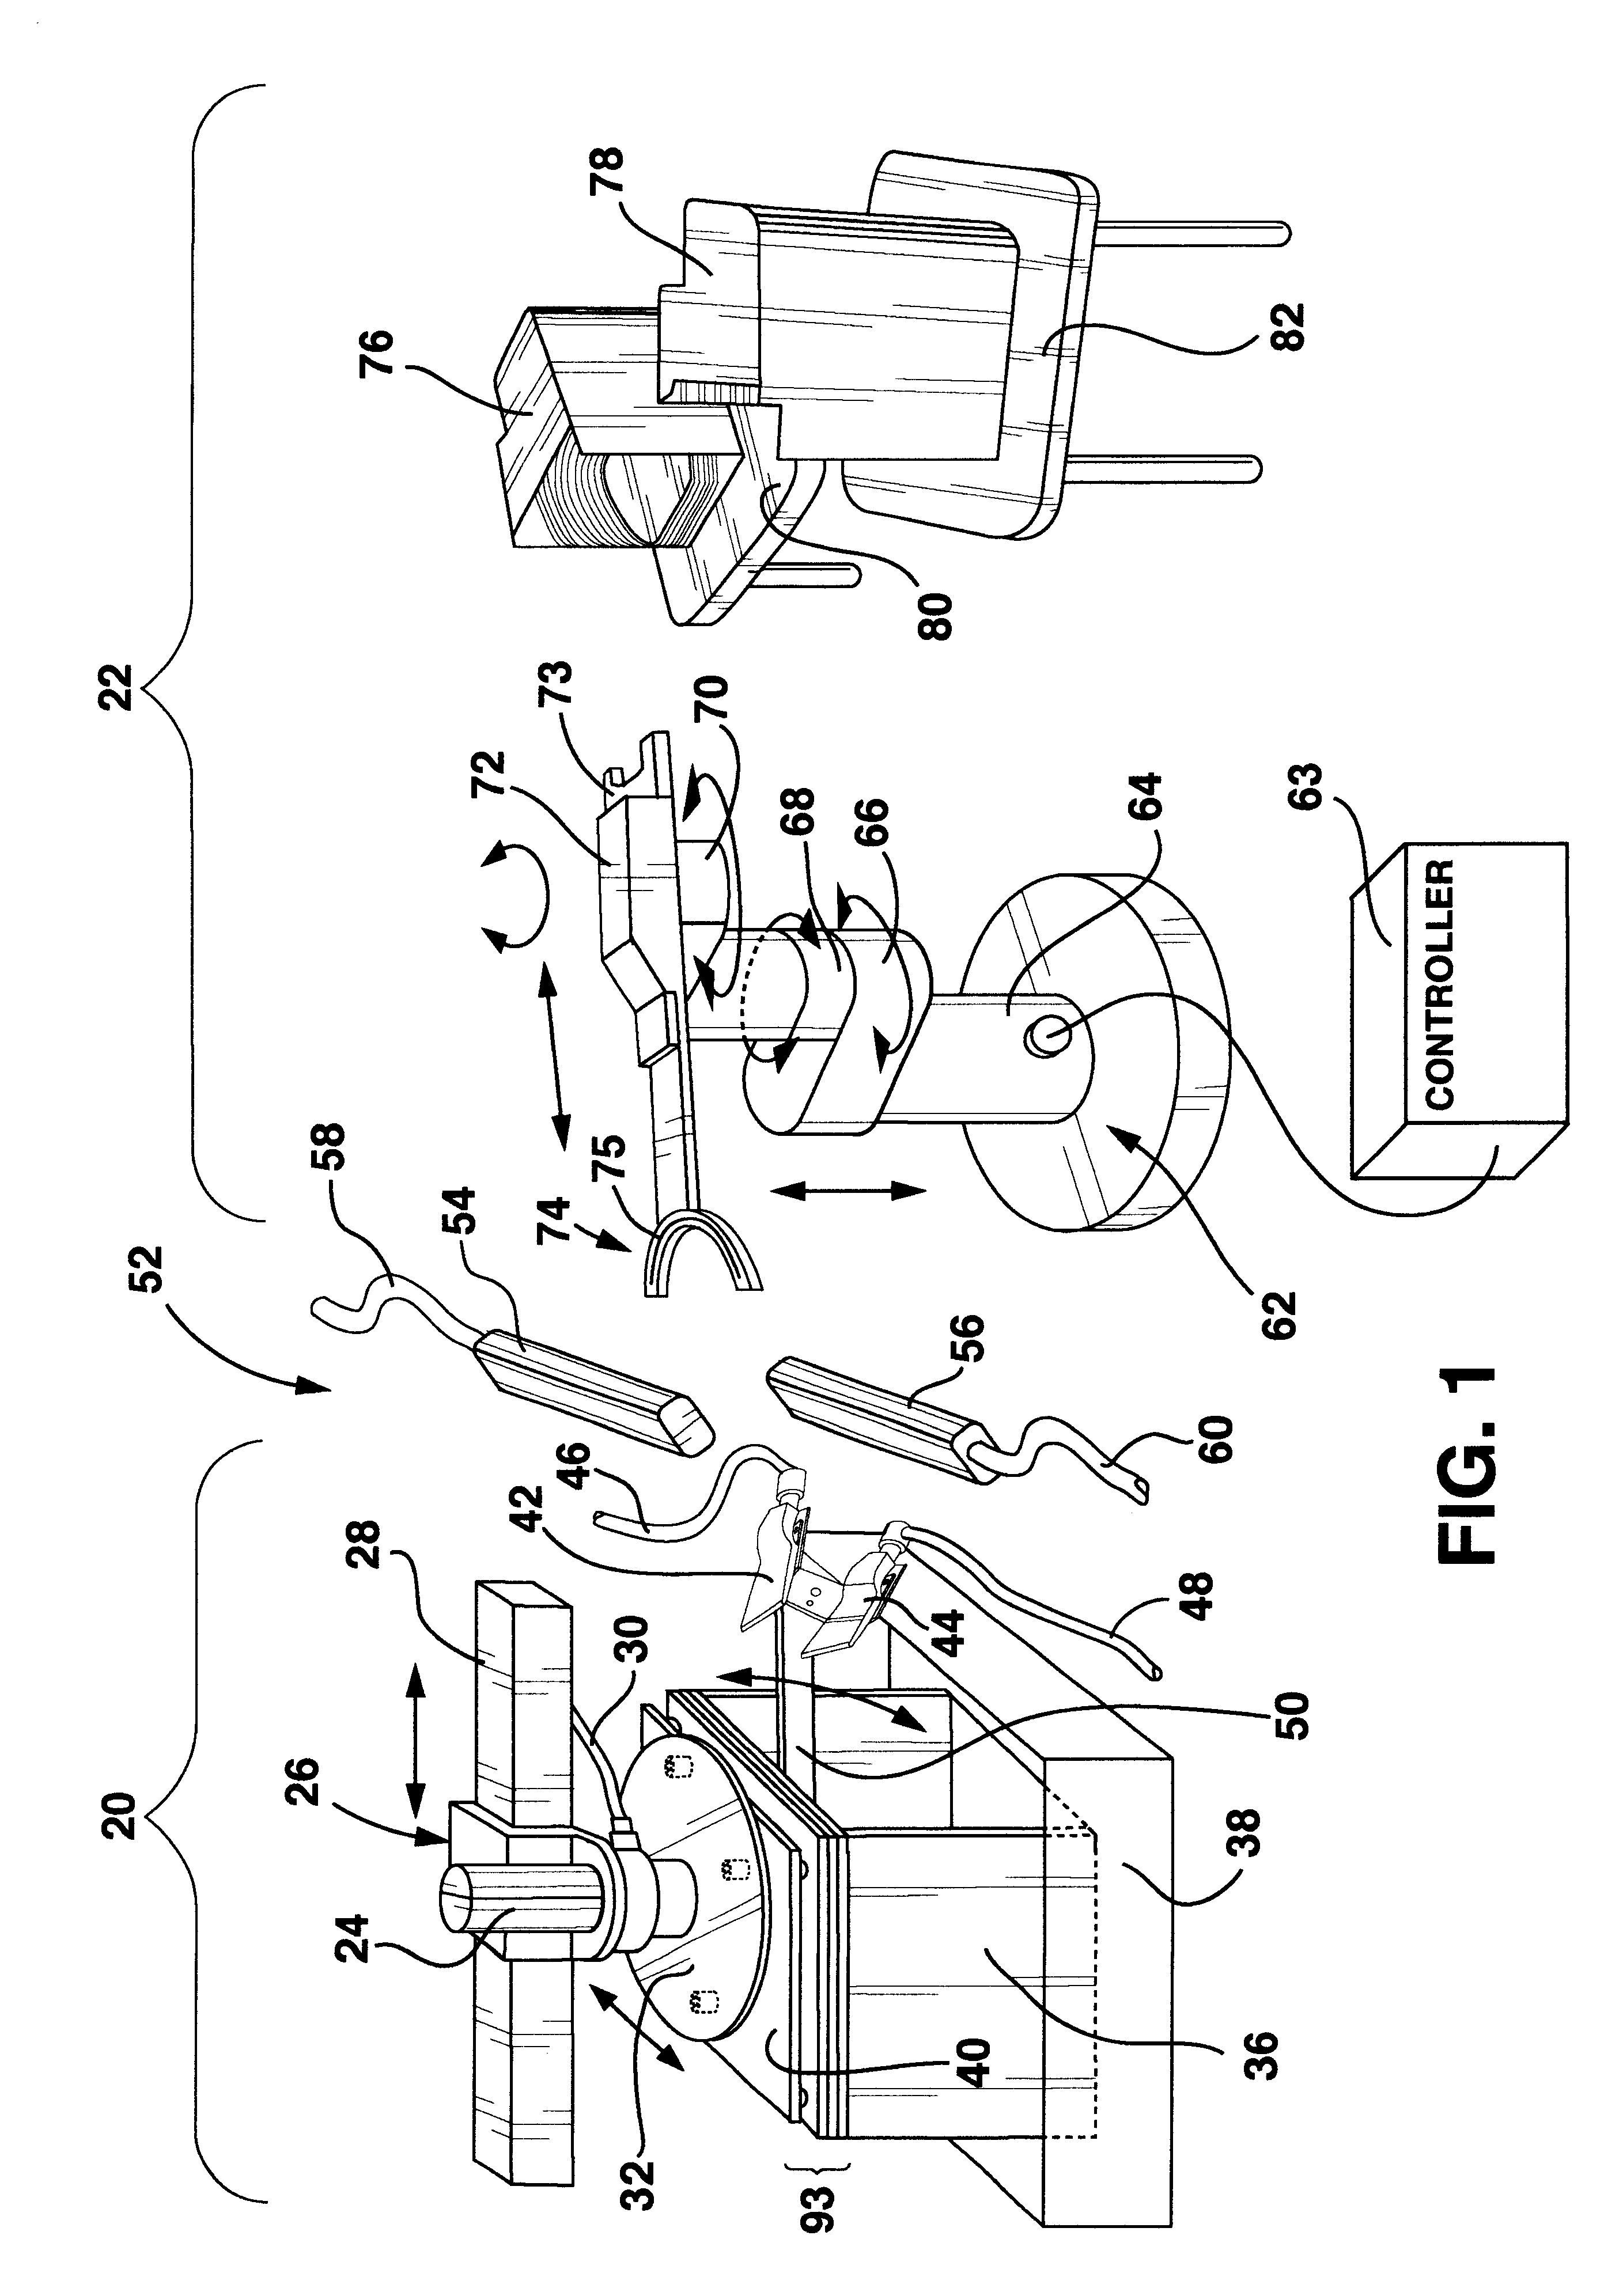 Automated acoustic micro imaging system and method